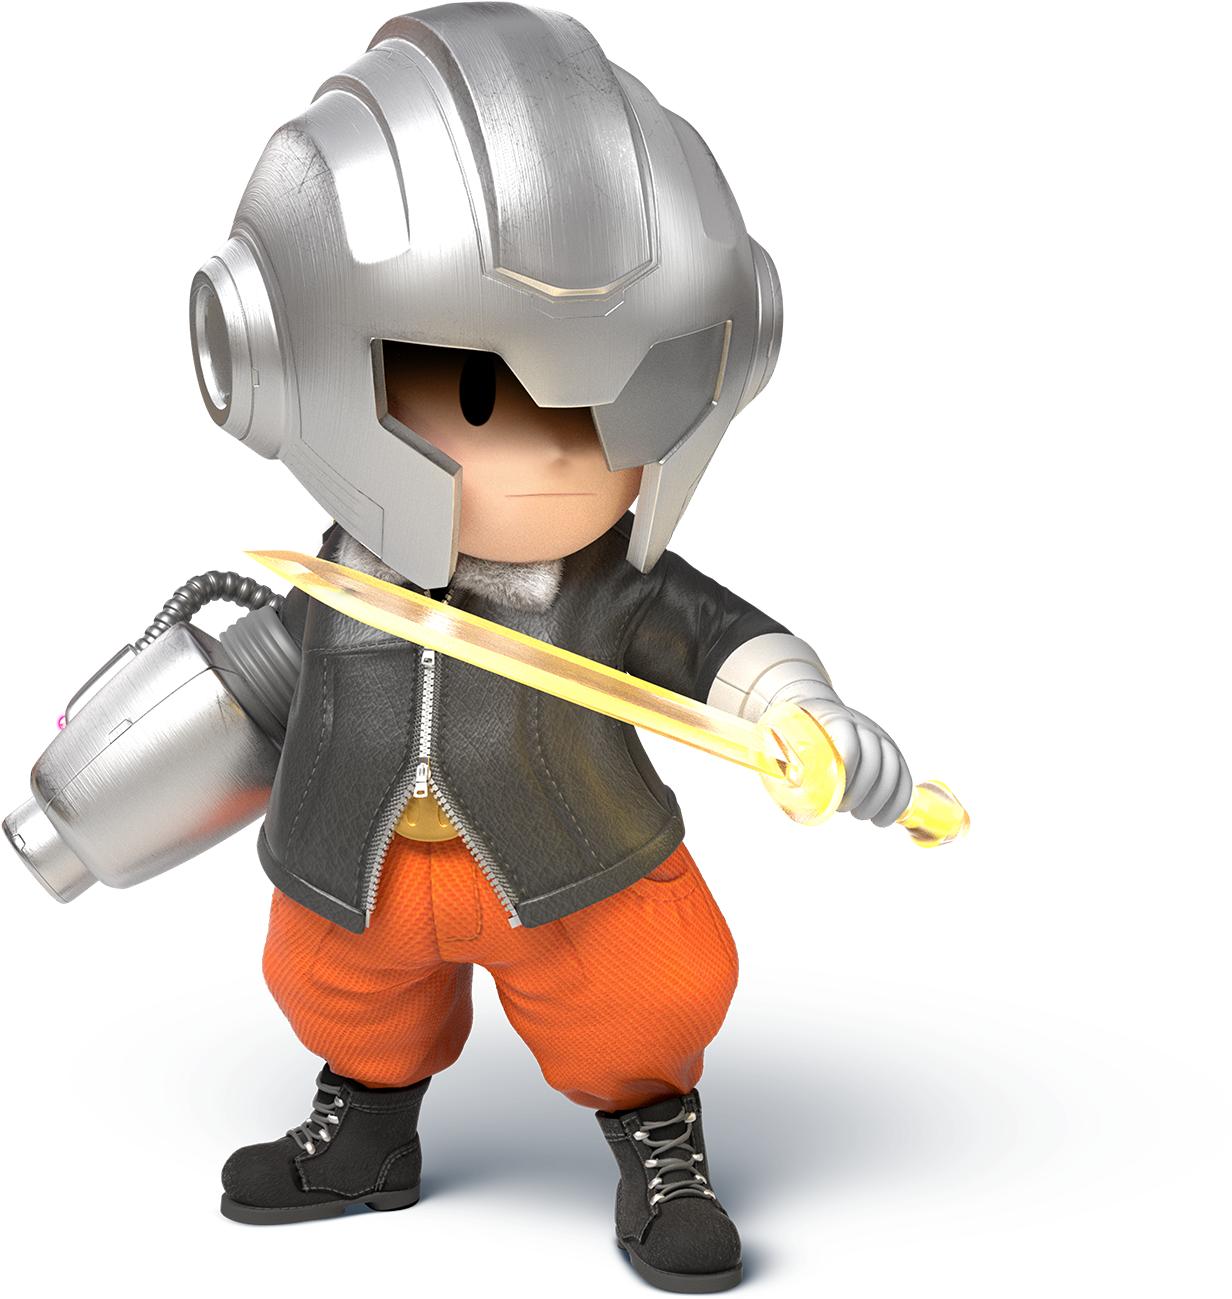 Image Result For Claus Mother 3 <switches Between> - Masked Man Smash Bros (1500x1501)